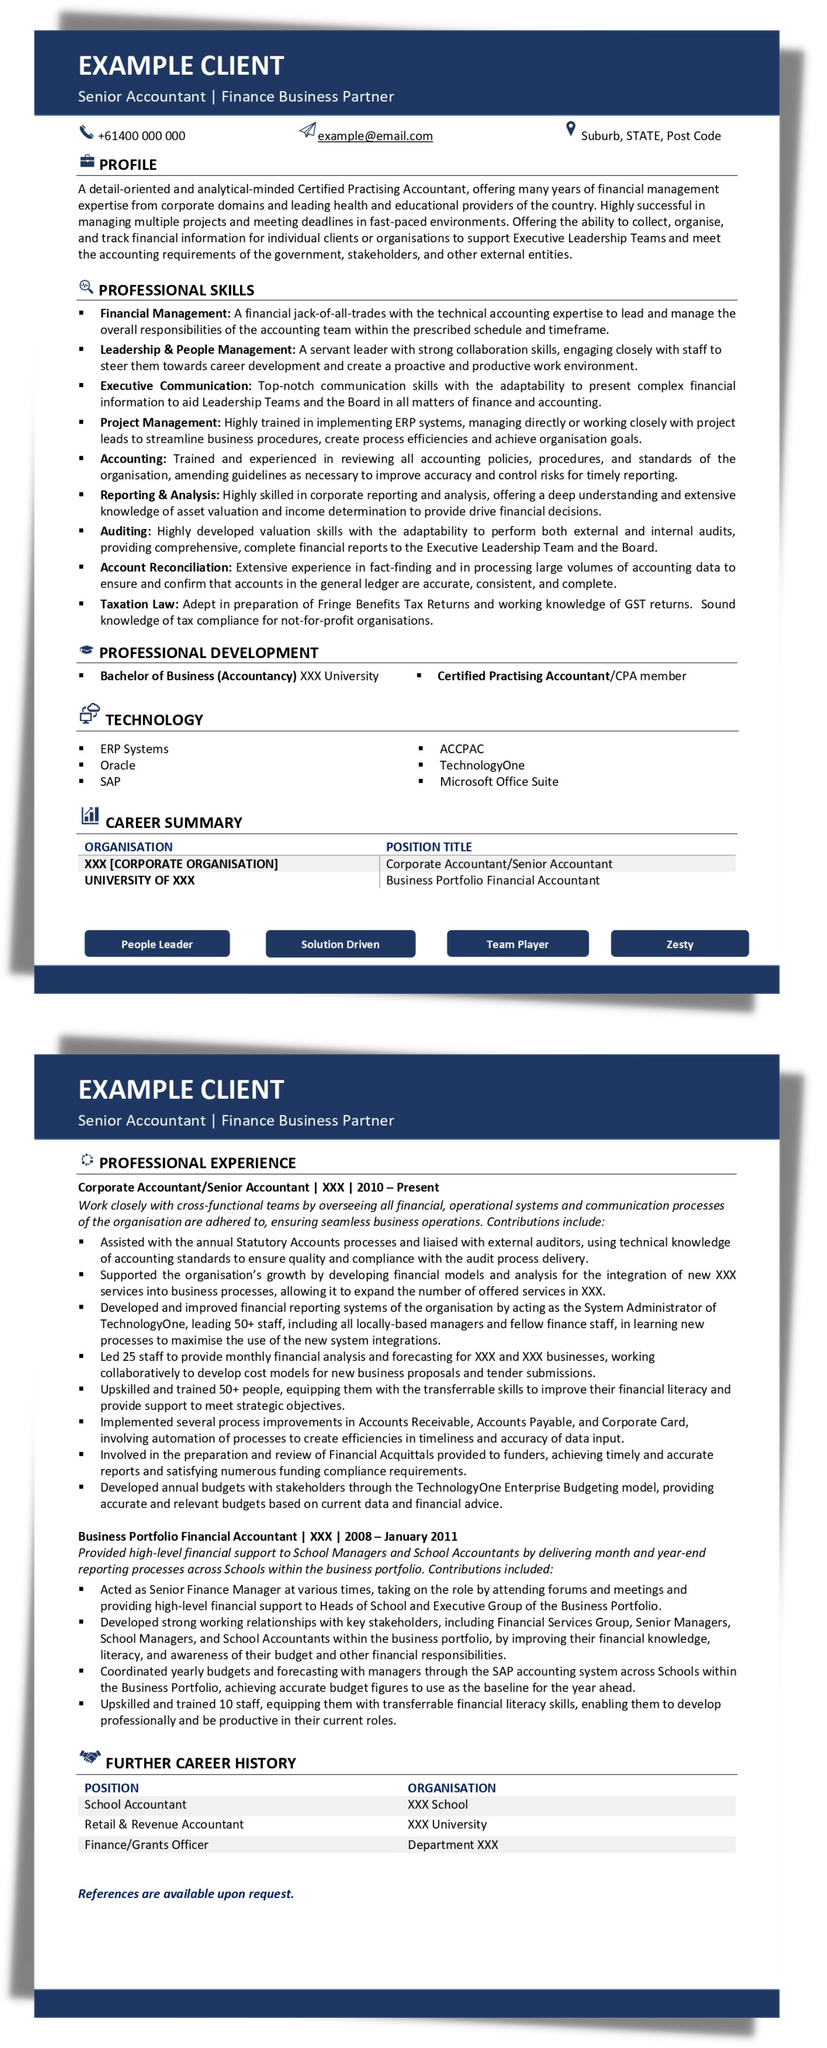 Accounting Resume Example (After)